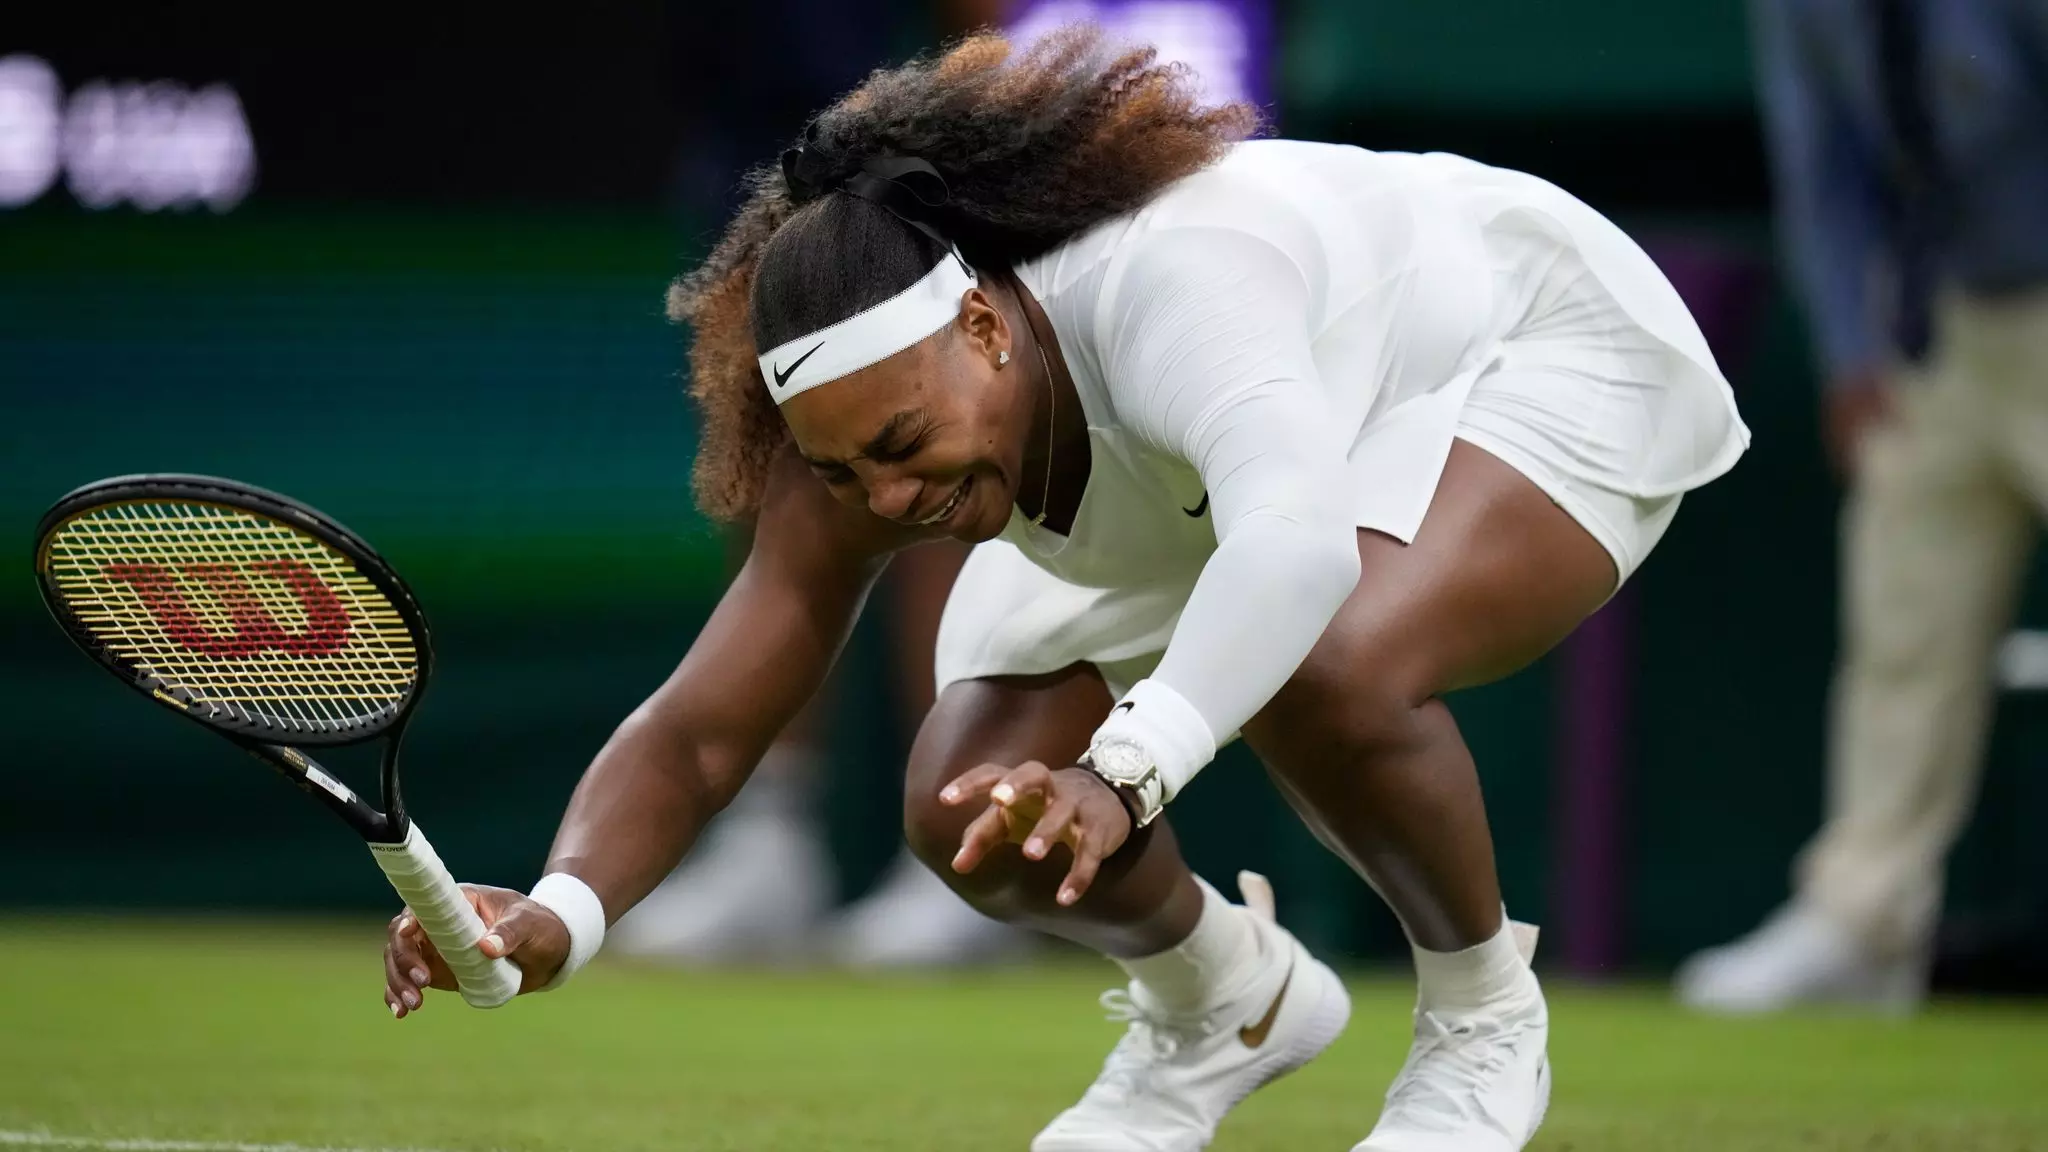 Serena Williams withdraws from Wimbledon opener after injury